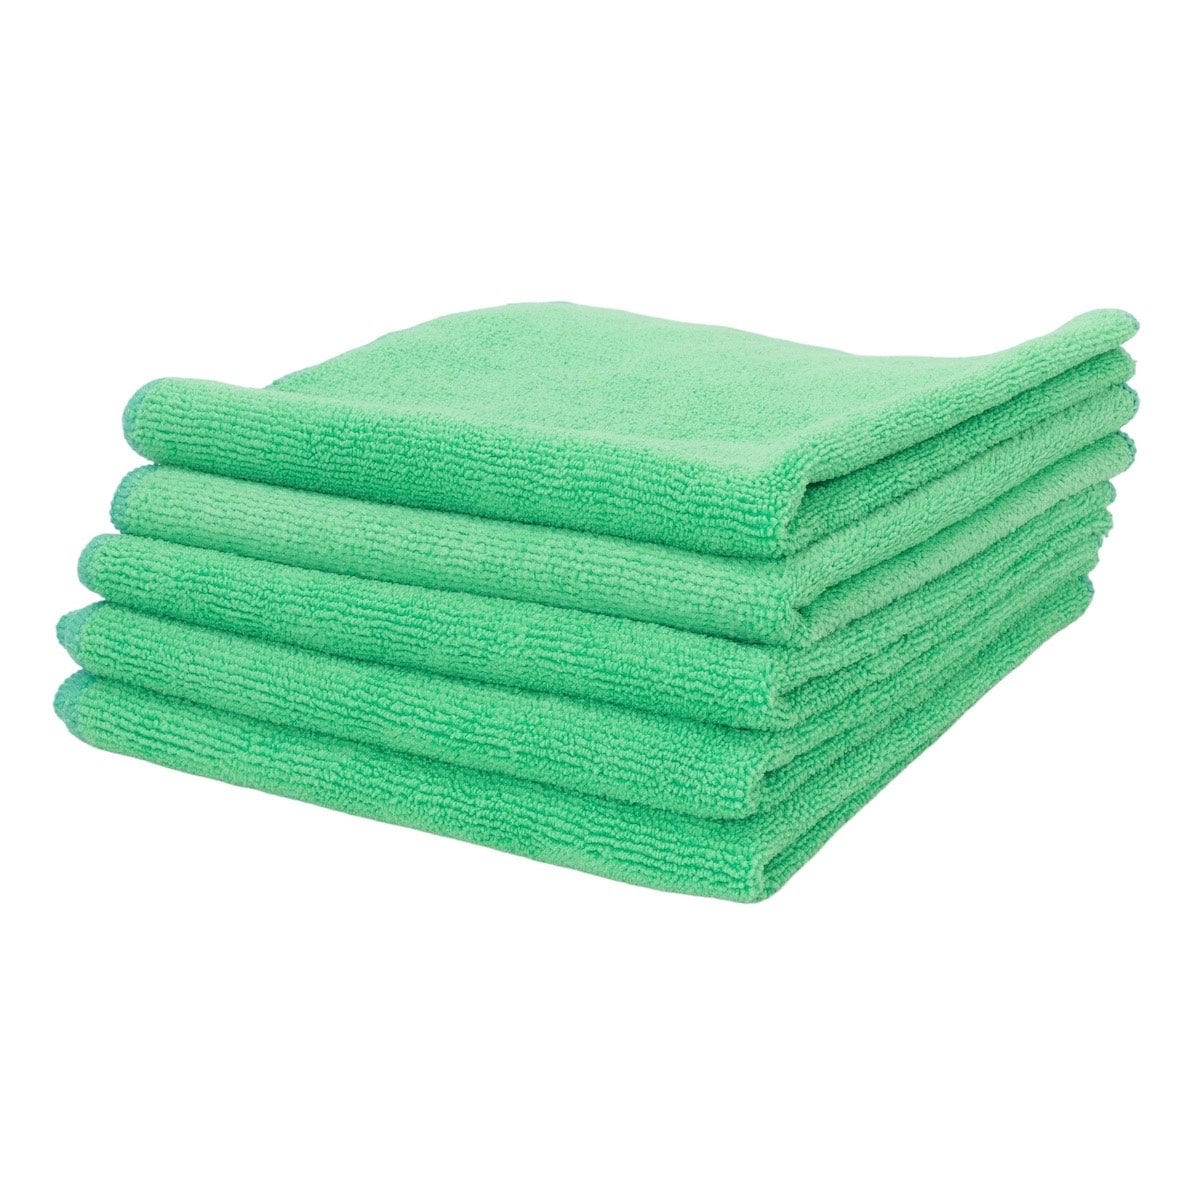 Microfiber Cleaning Towels, Microfiber Cleaning Cloths